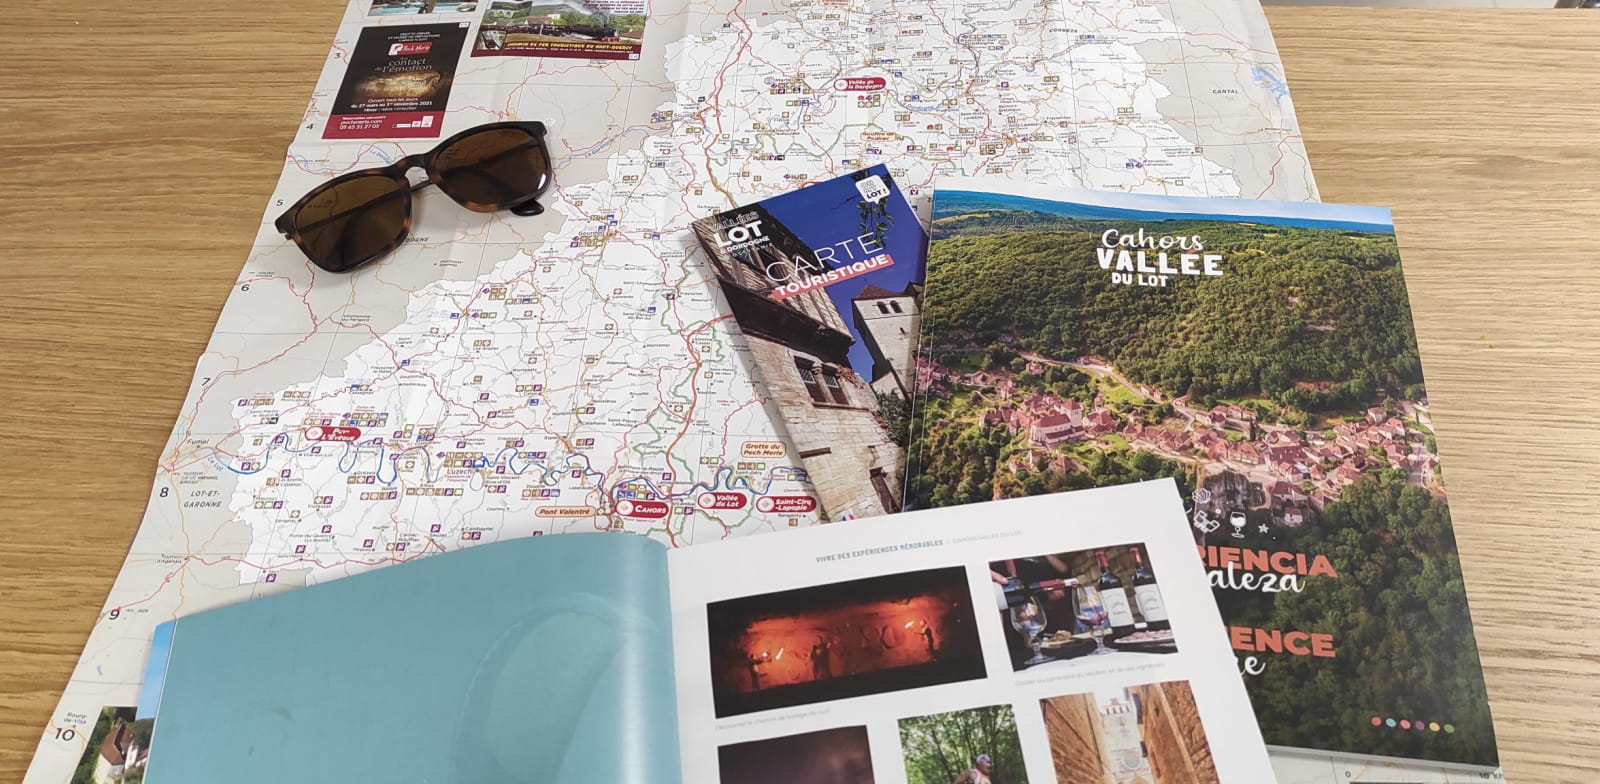 Brochures from the Tourist Office of Cahors - Lot Valley